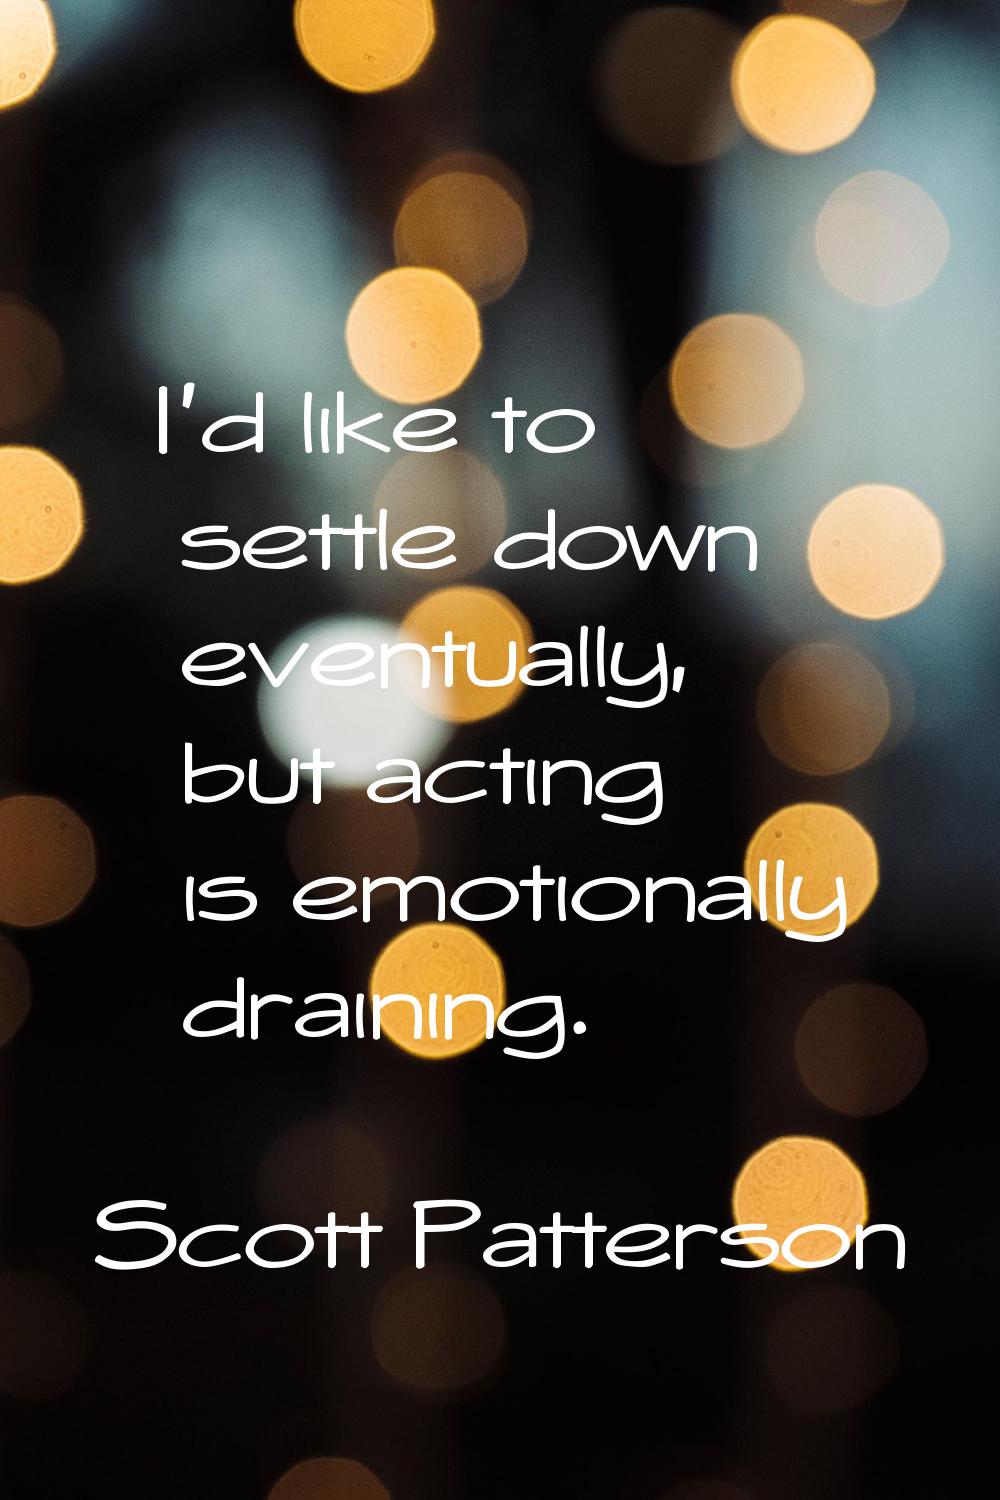 I'd like to settle down eventually, but acting is emotionally draining.